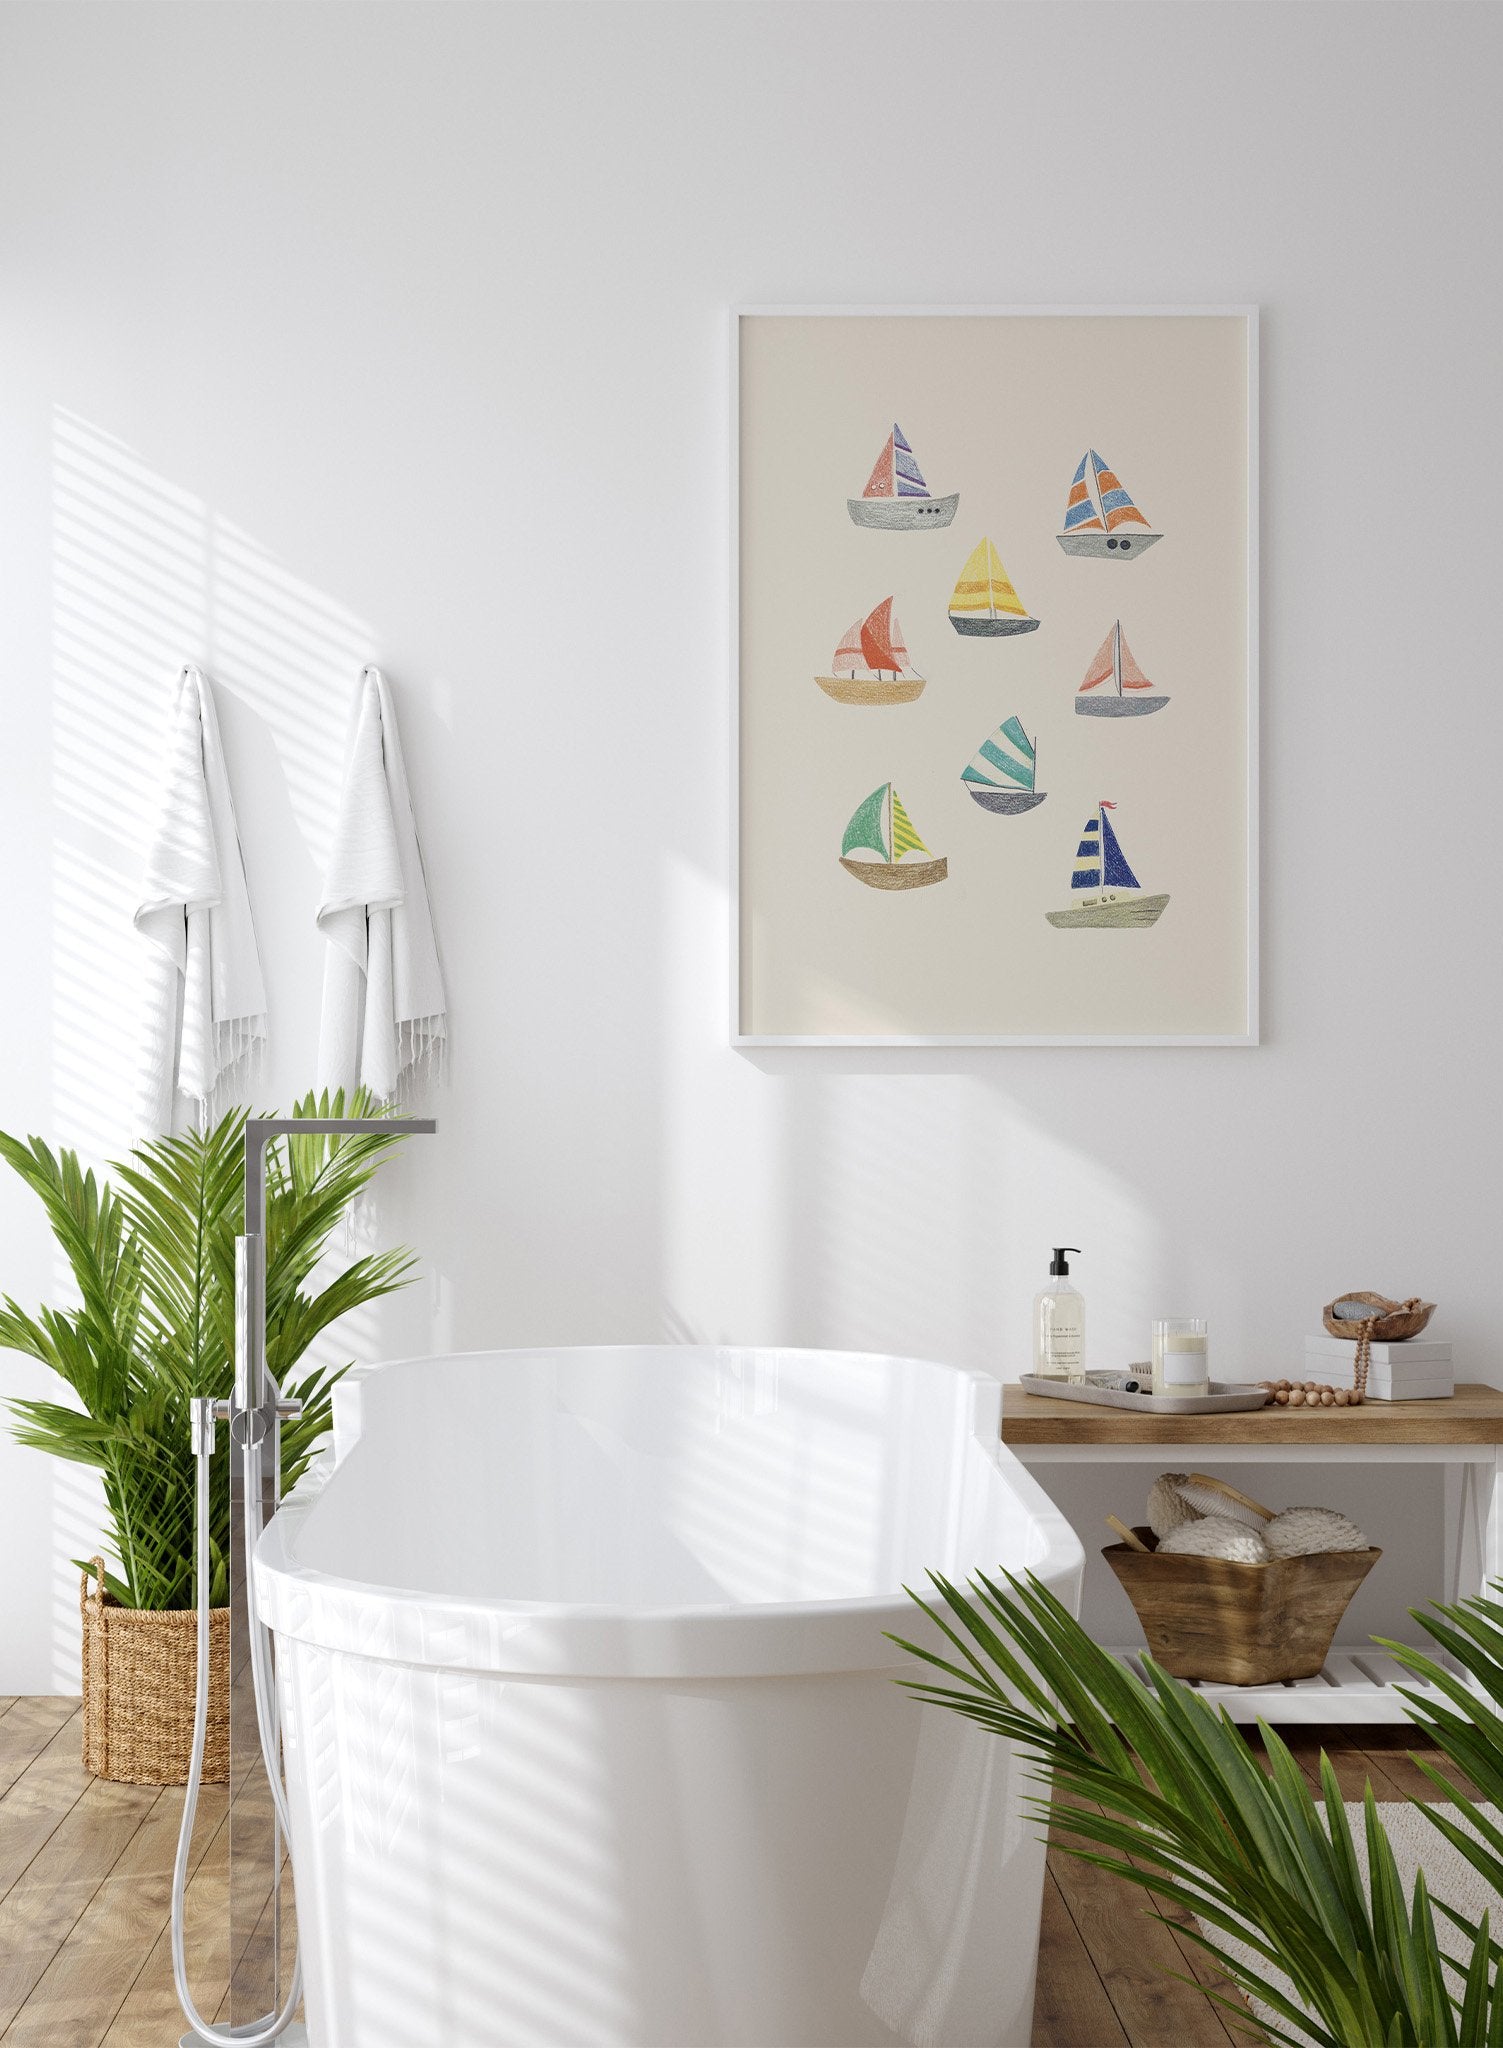 Ship Parade is a minimalist illustration of eight colourful and striped sailboats of different styles on a beige background by Opposite Wall.